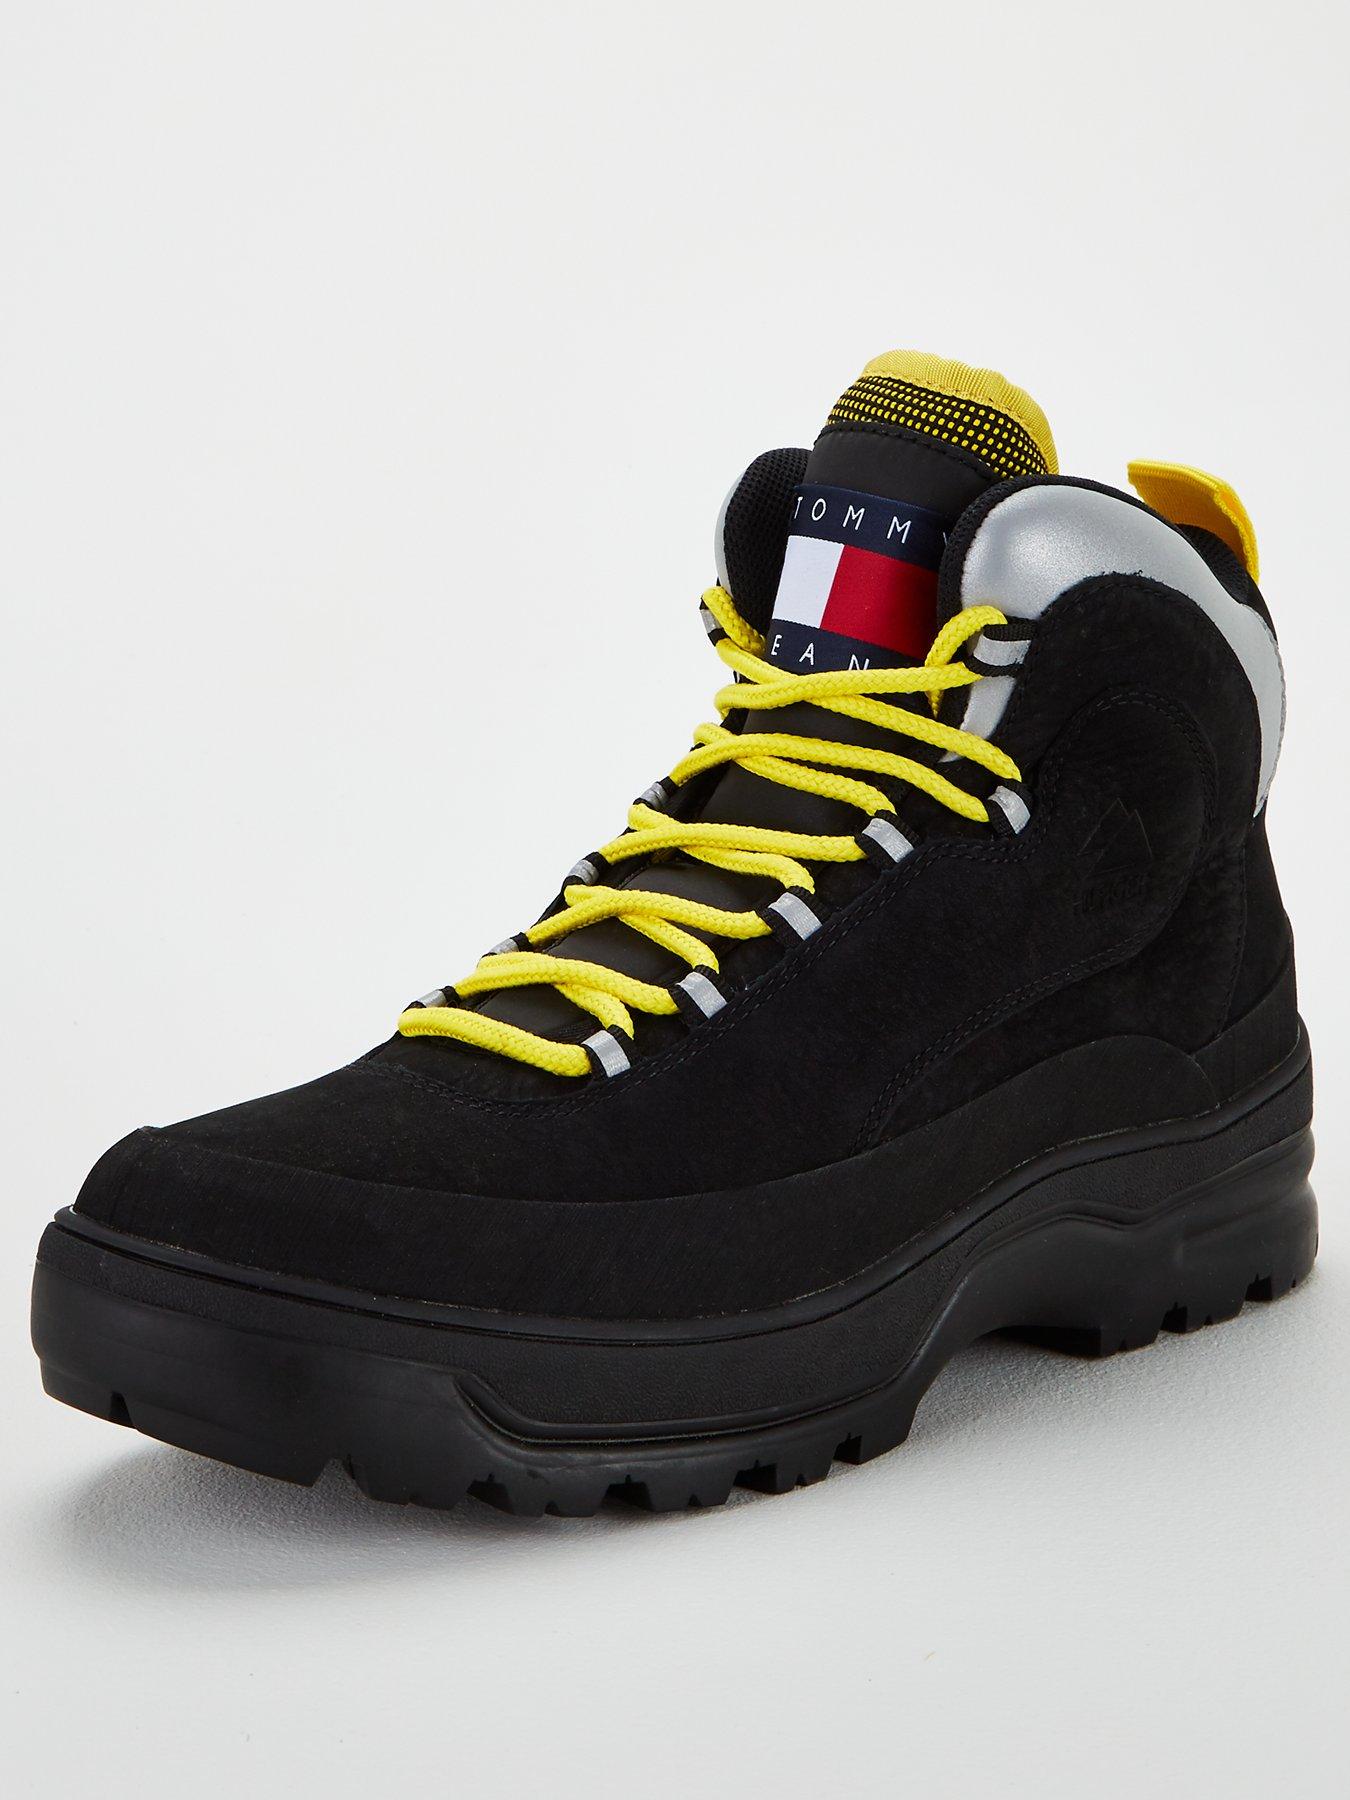 tommy hilfiger expedition boots